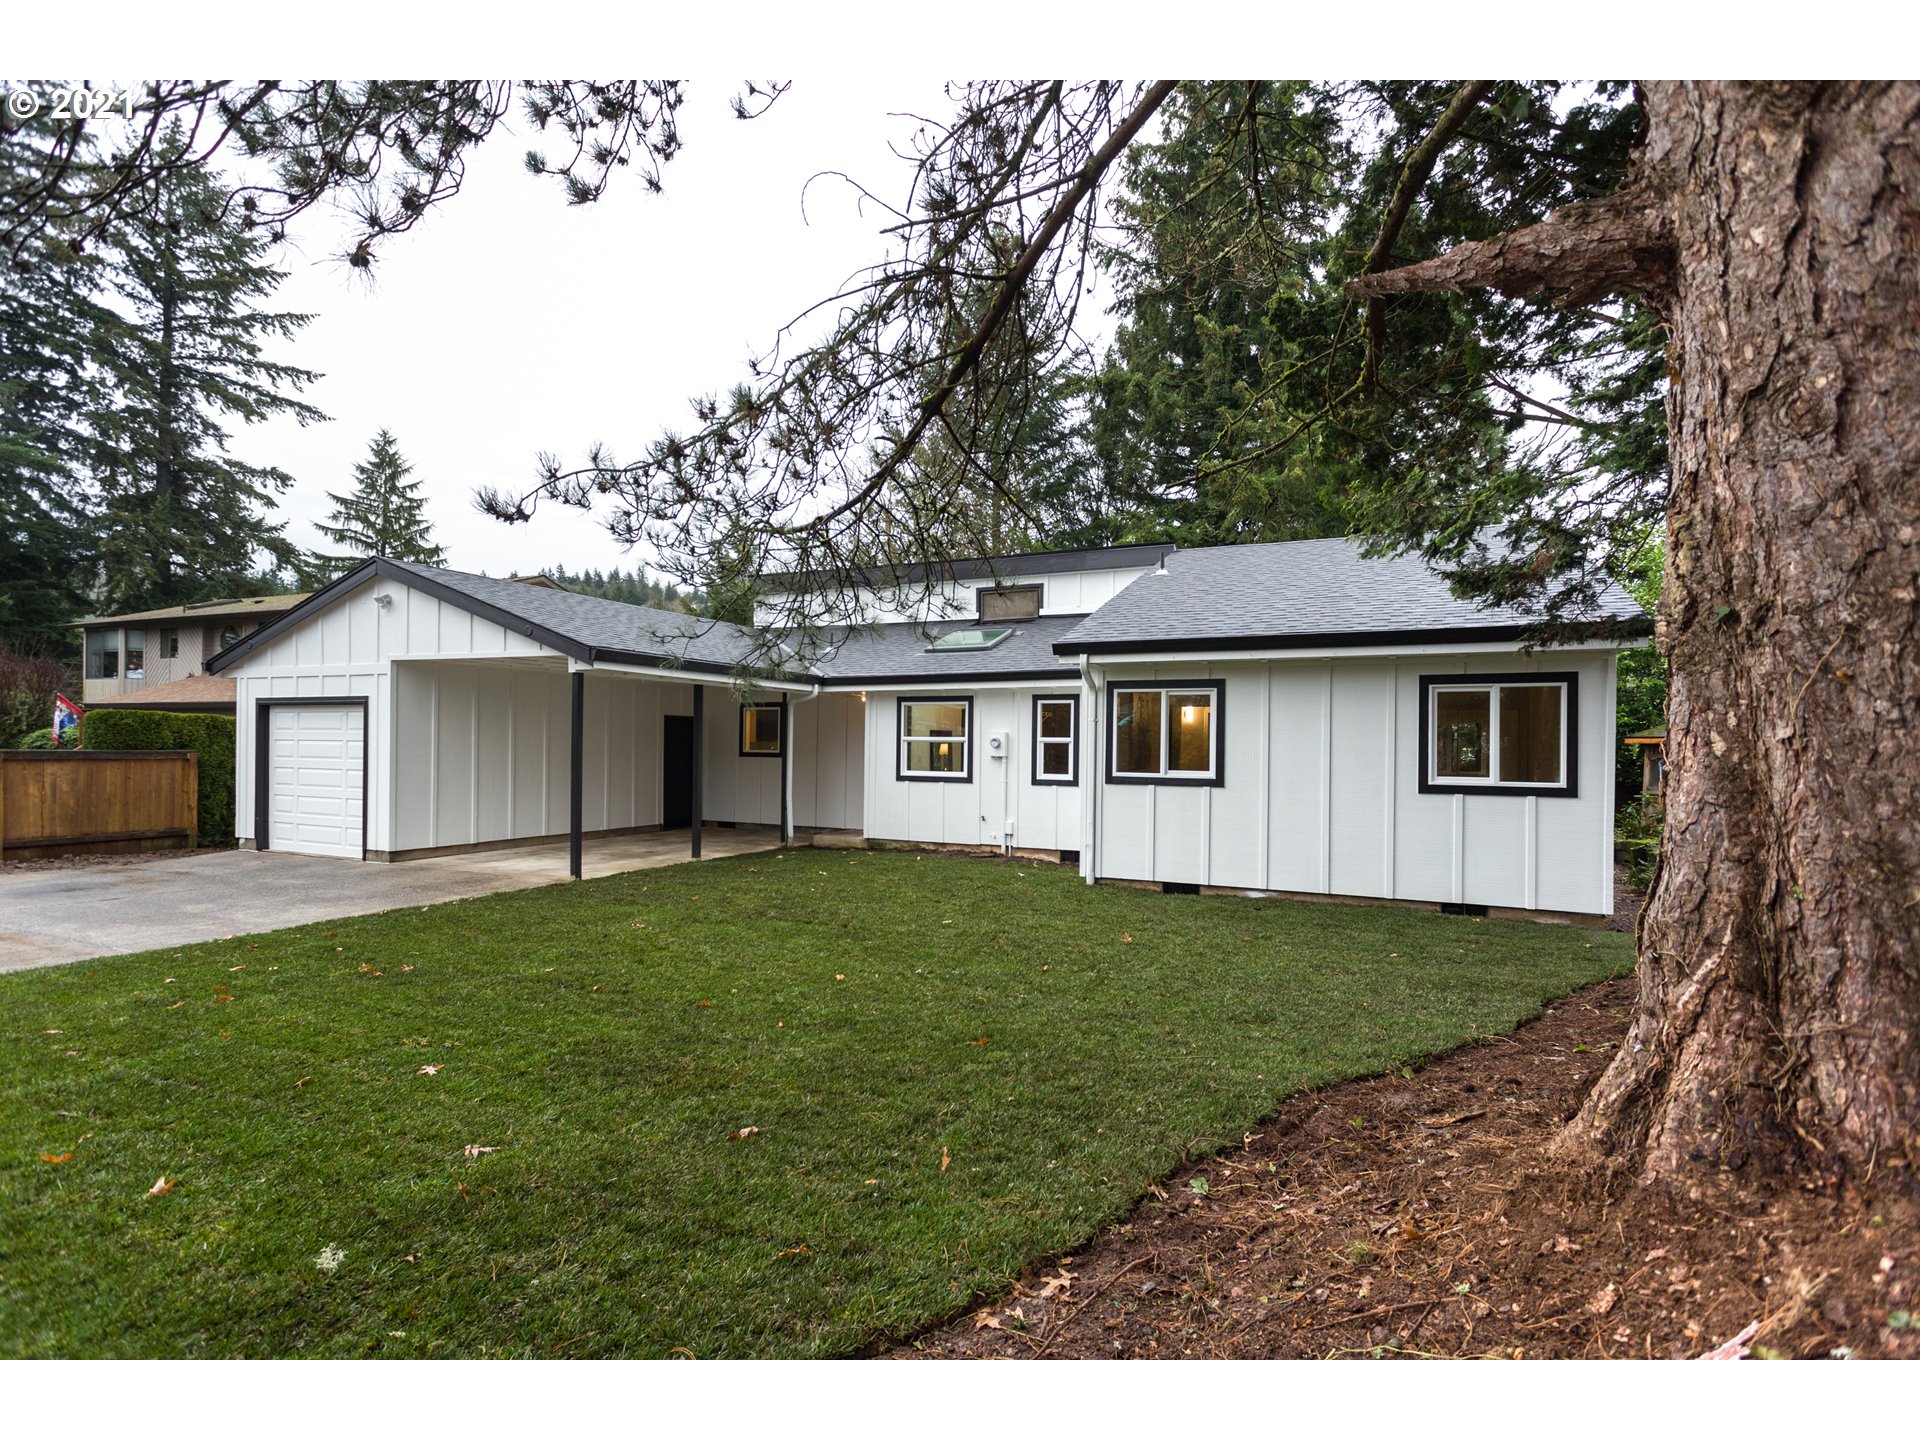 6830 SE 135TH AVE (1 of 17)